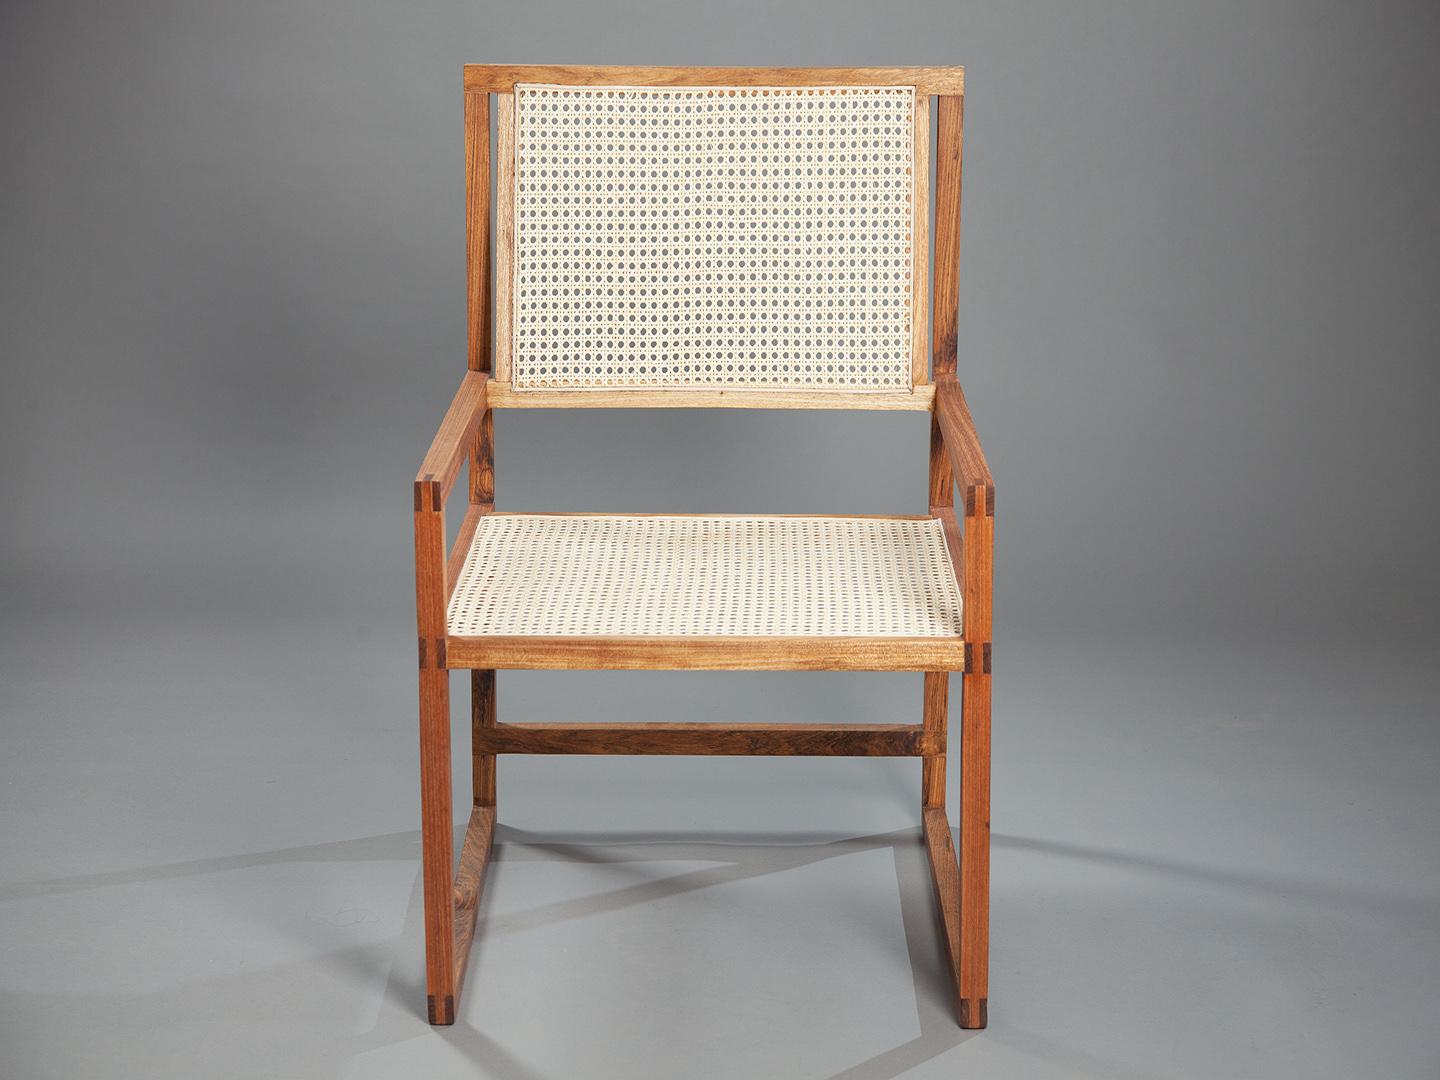 Hand-Crafted The Square Armchair. Produced with Solid Wood Using Mortise and Tenon Joinery.  For Sale